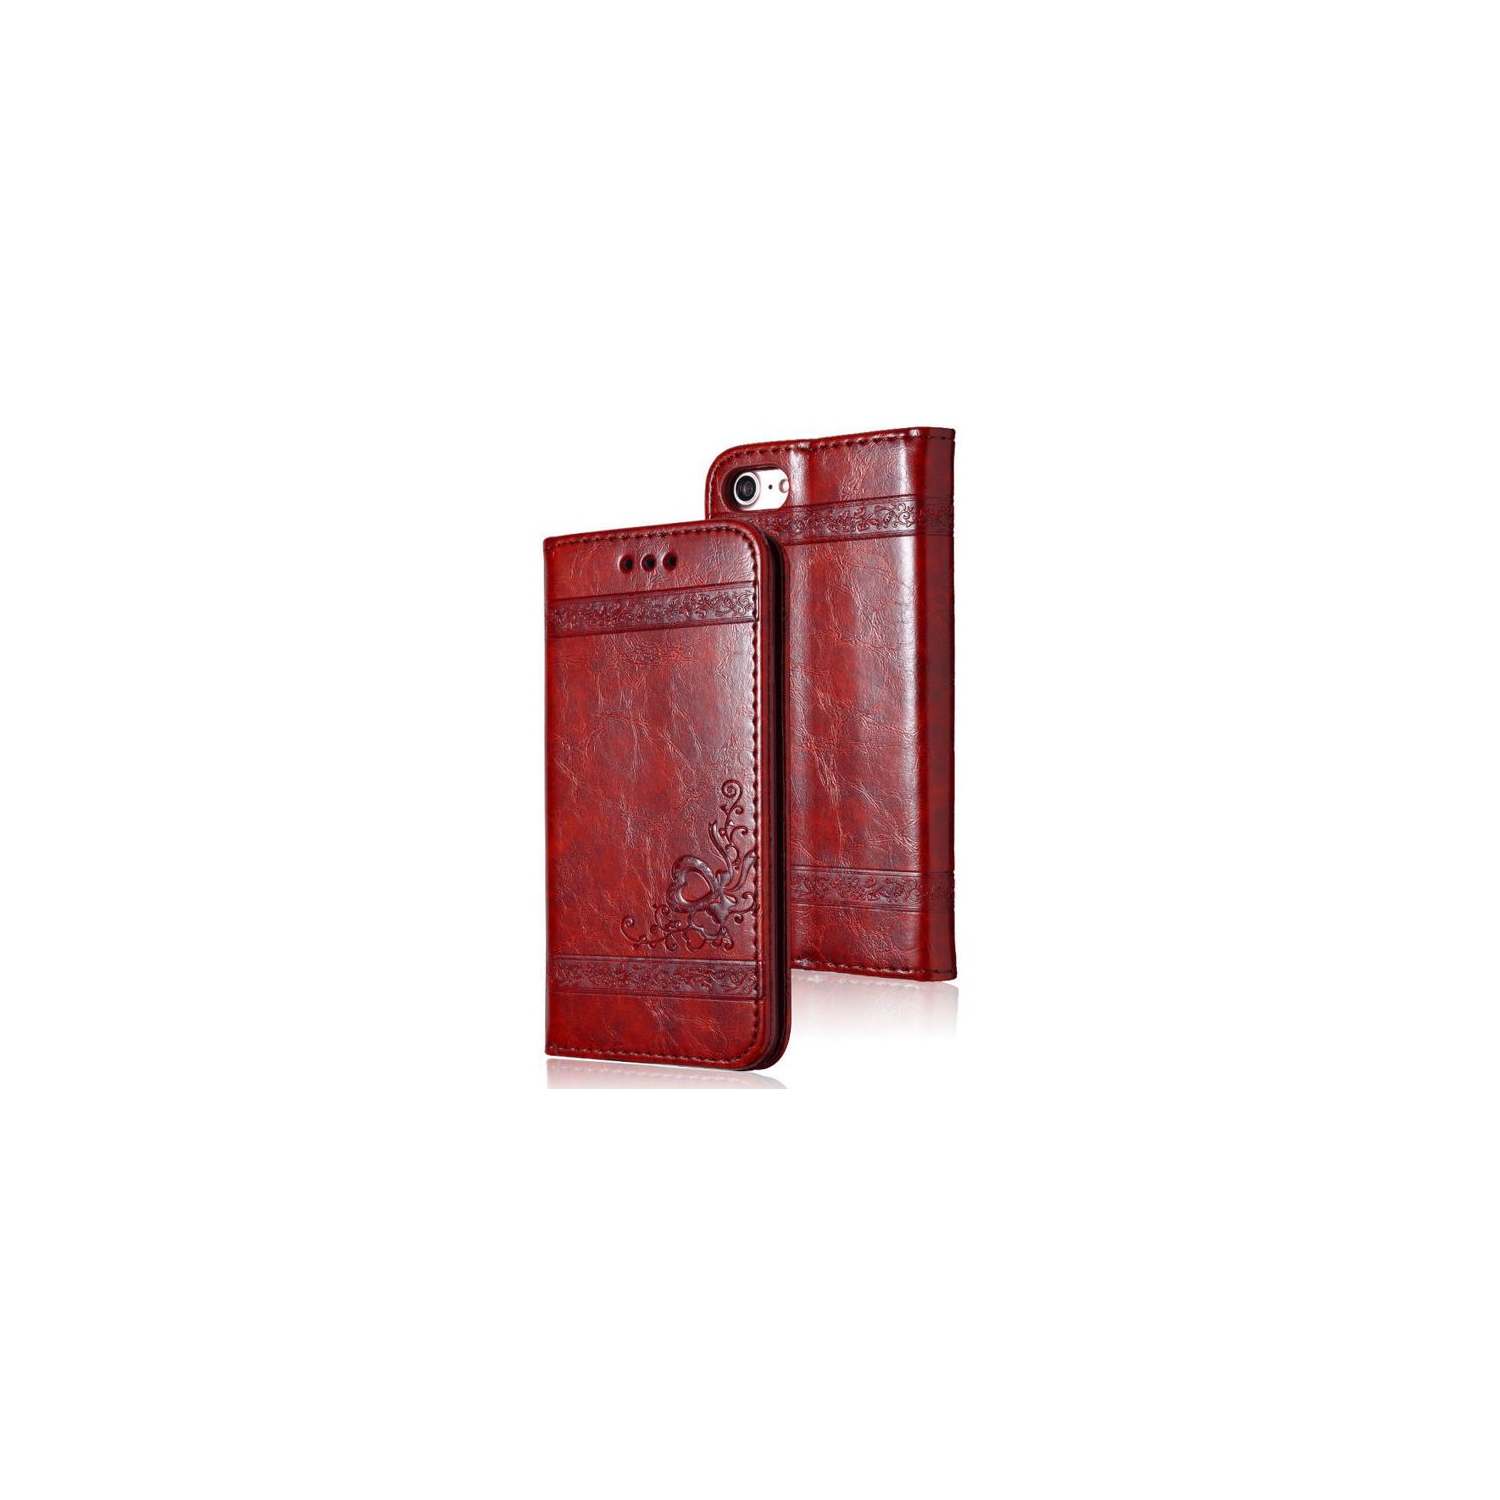 Luxury Wallet Case for iPhone 7/8 Leather Cover Pouch Stand Flip (Wine Red)